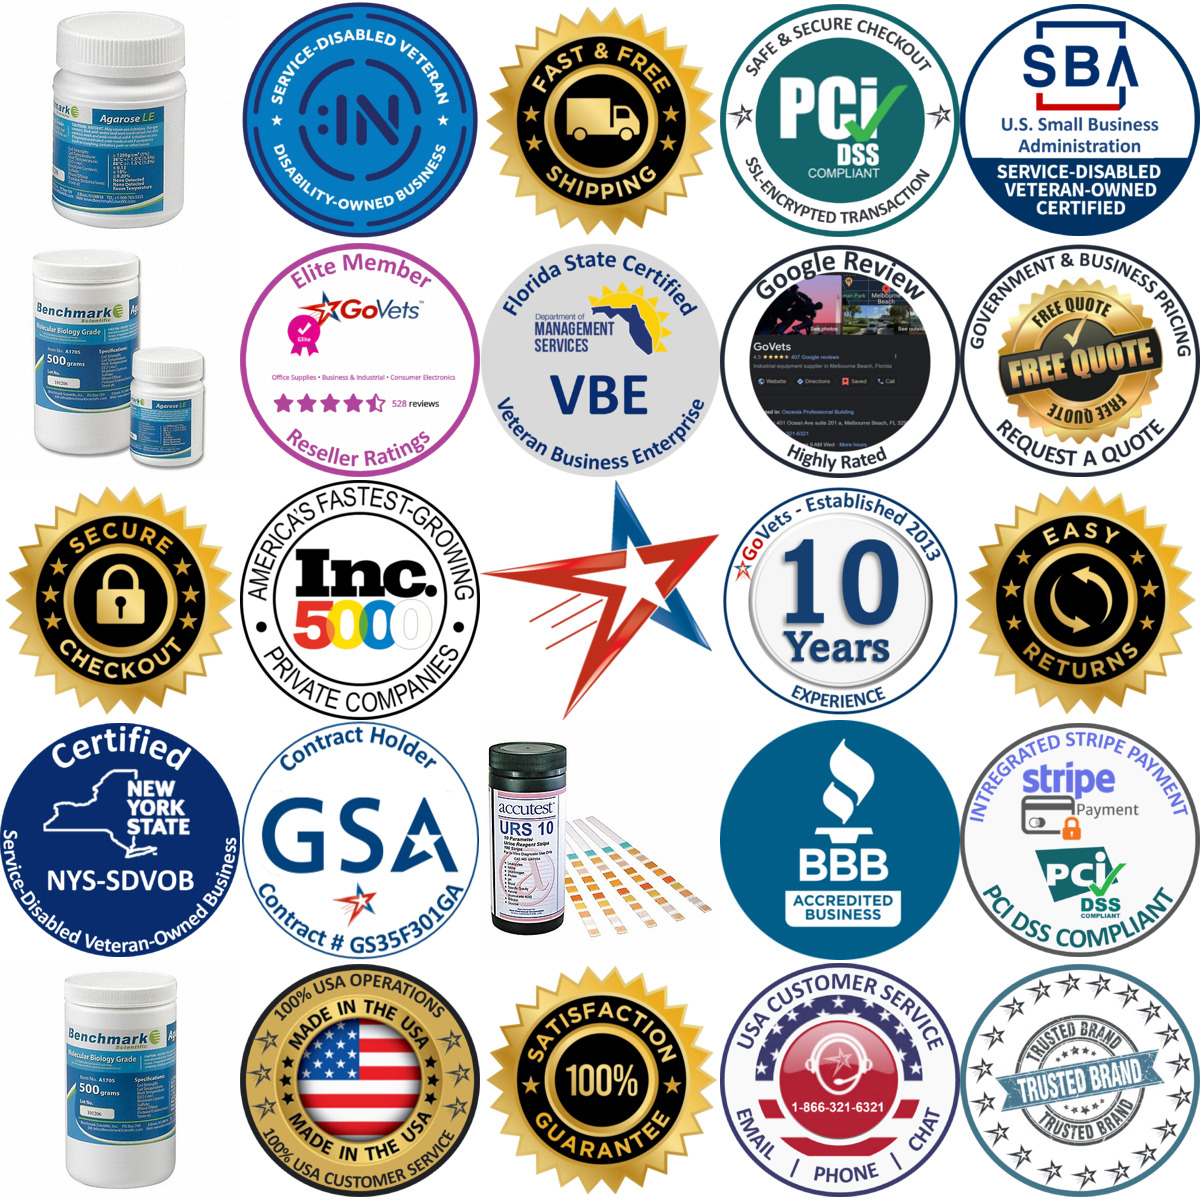 A selection of Detection Reagents products on GoVets